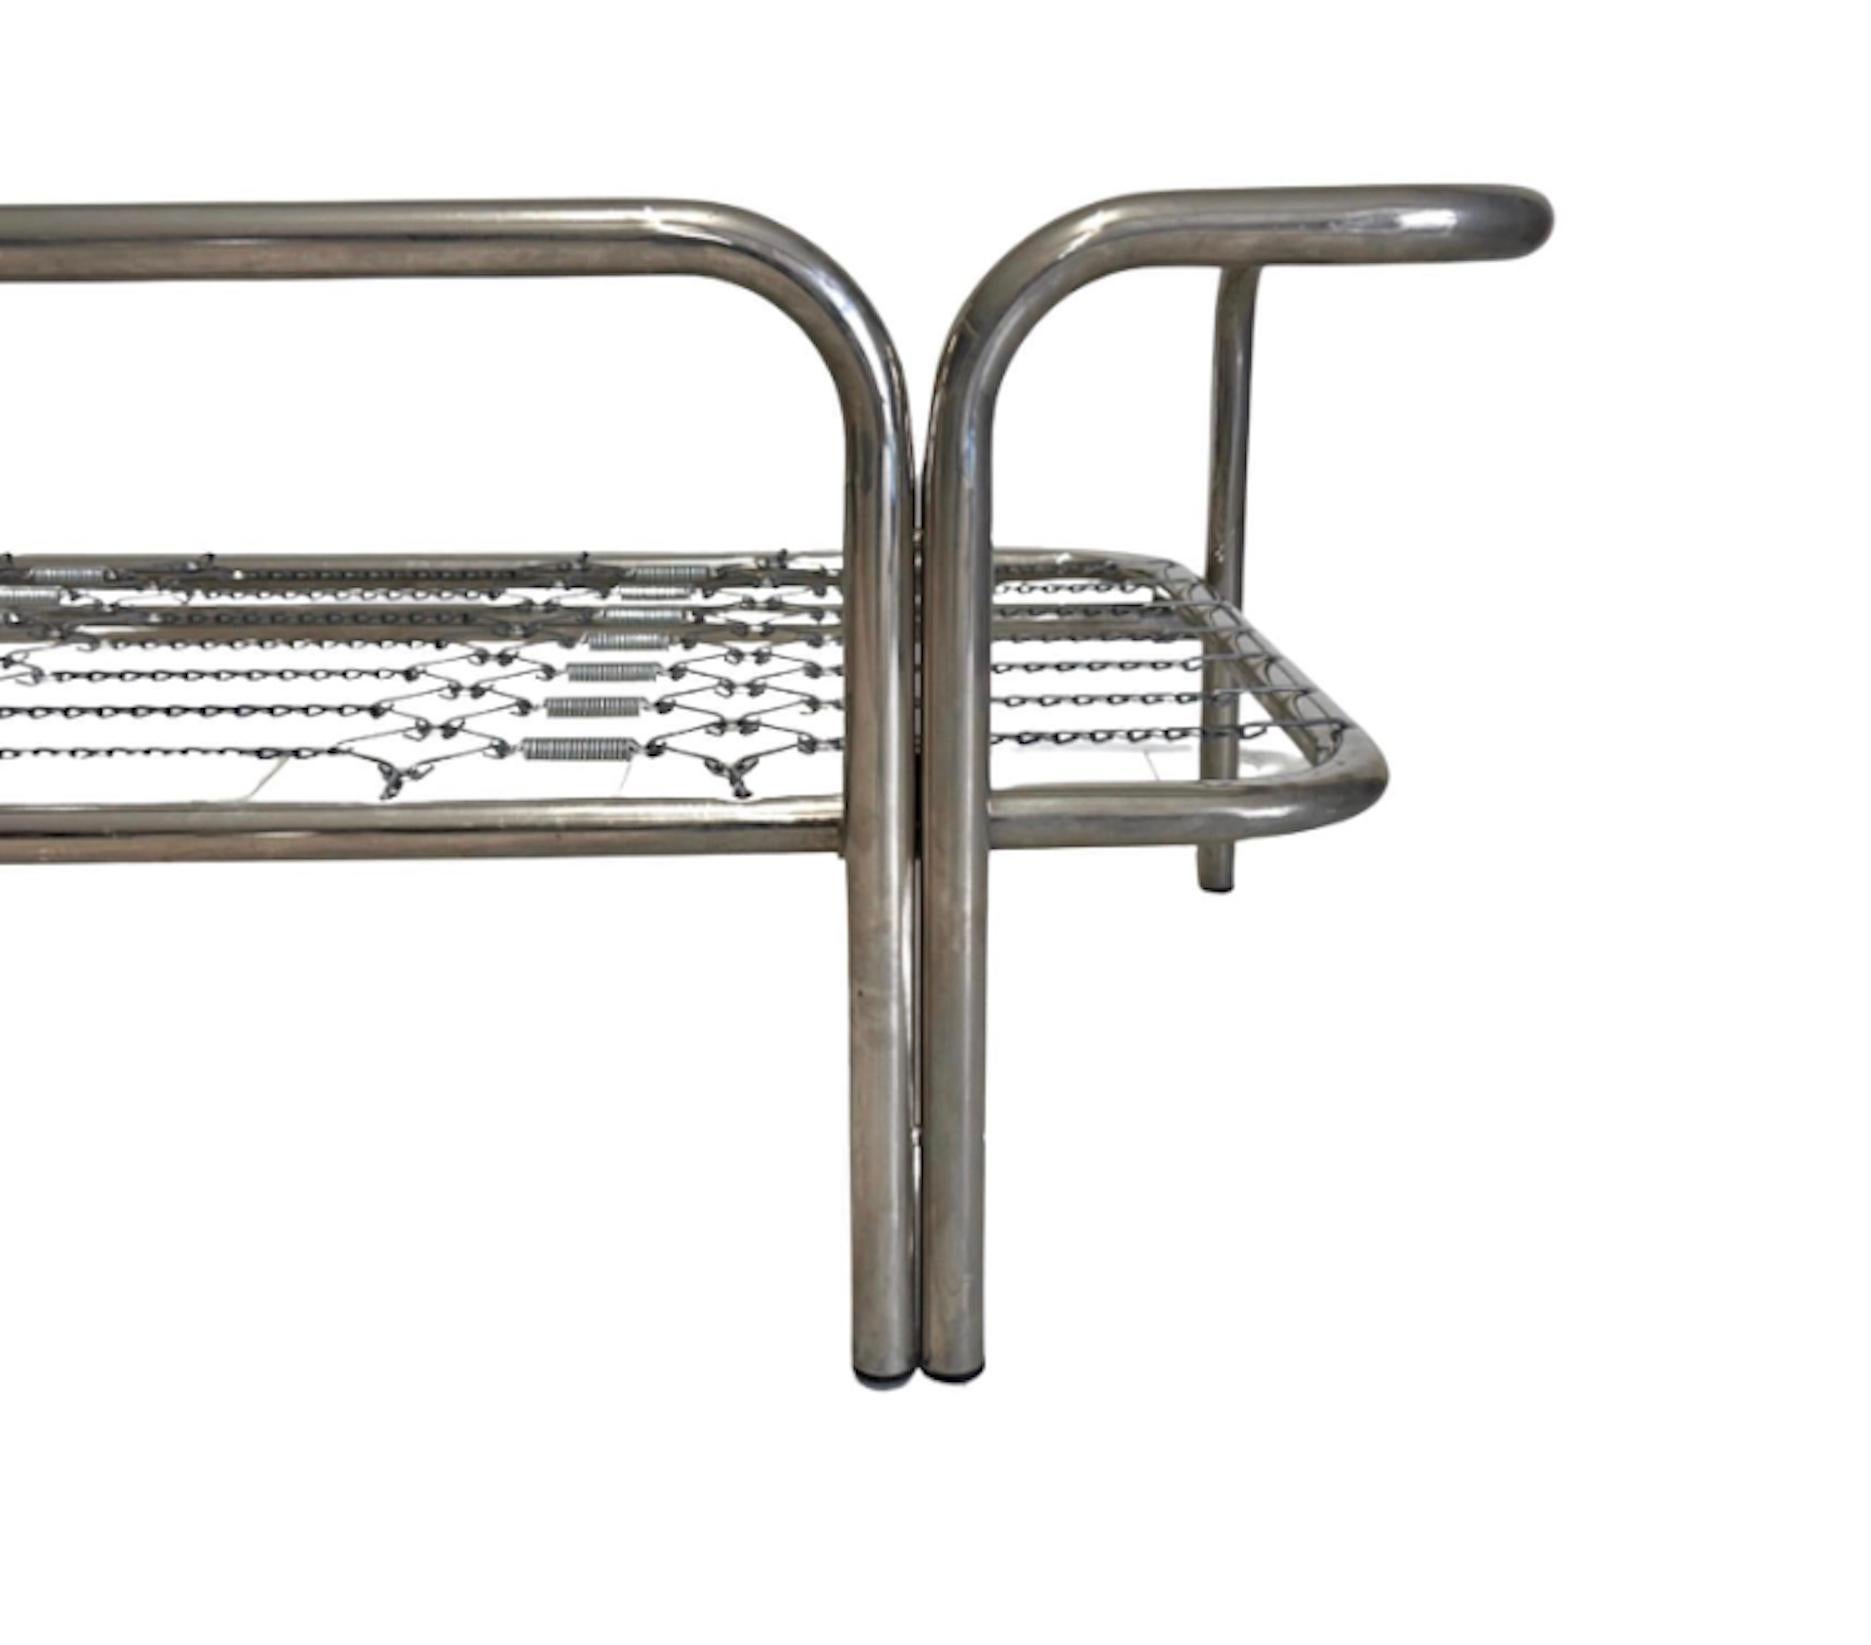 Gae Aulenti for Poltronova 'Locus Solus' day bed in chromed steel In Good Condition For Sale In Argelato, BO